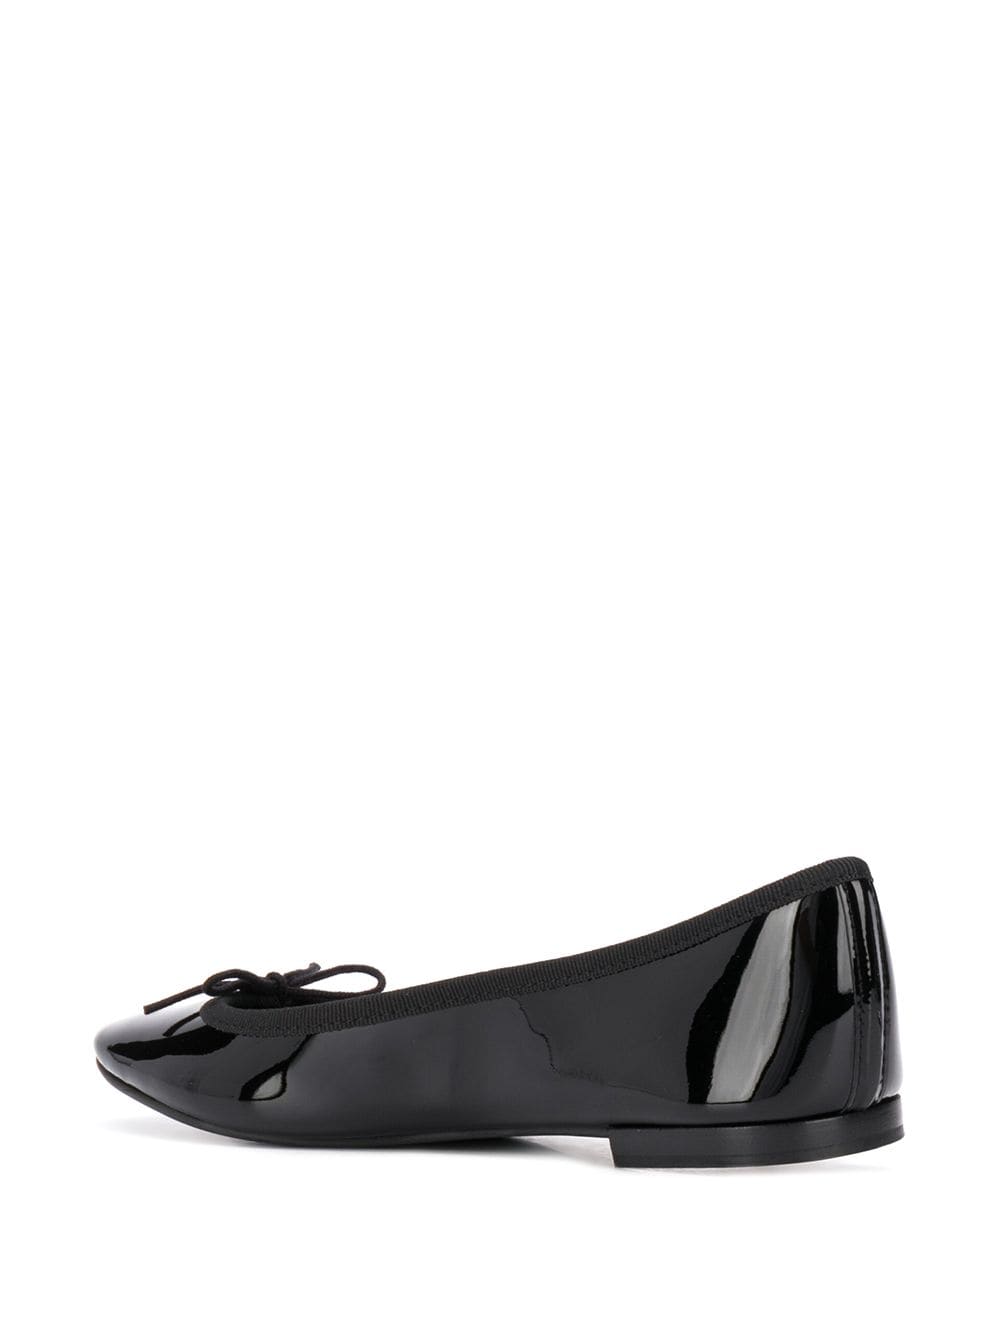 Shop Repetto Bow Detail Patent Ballerina Shoes In Black